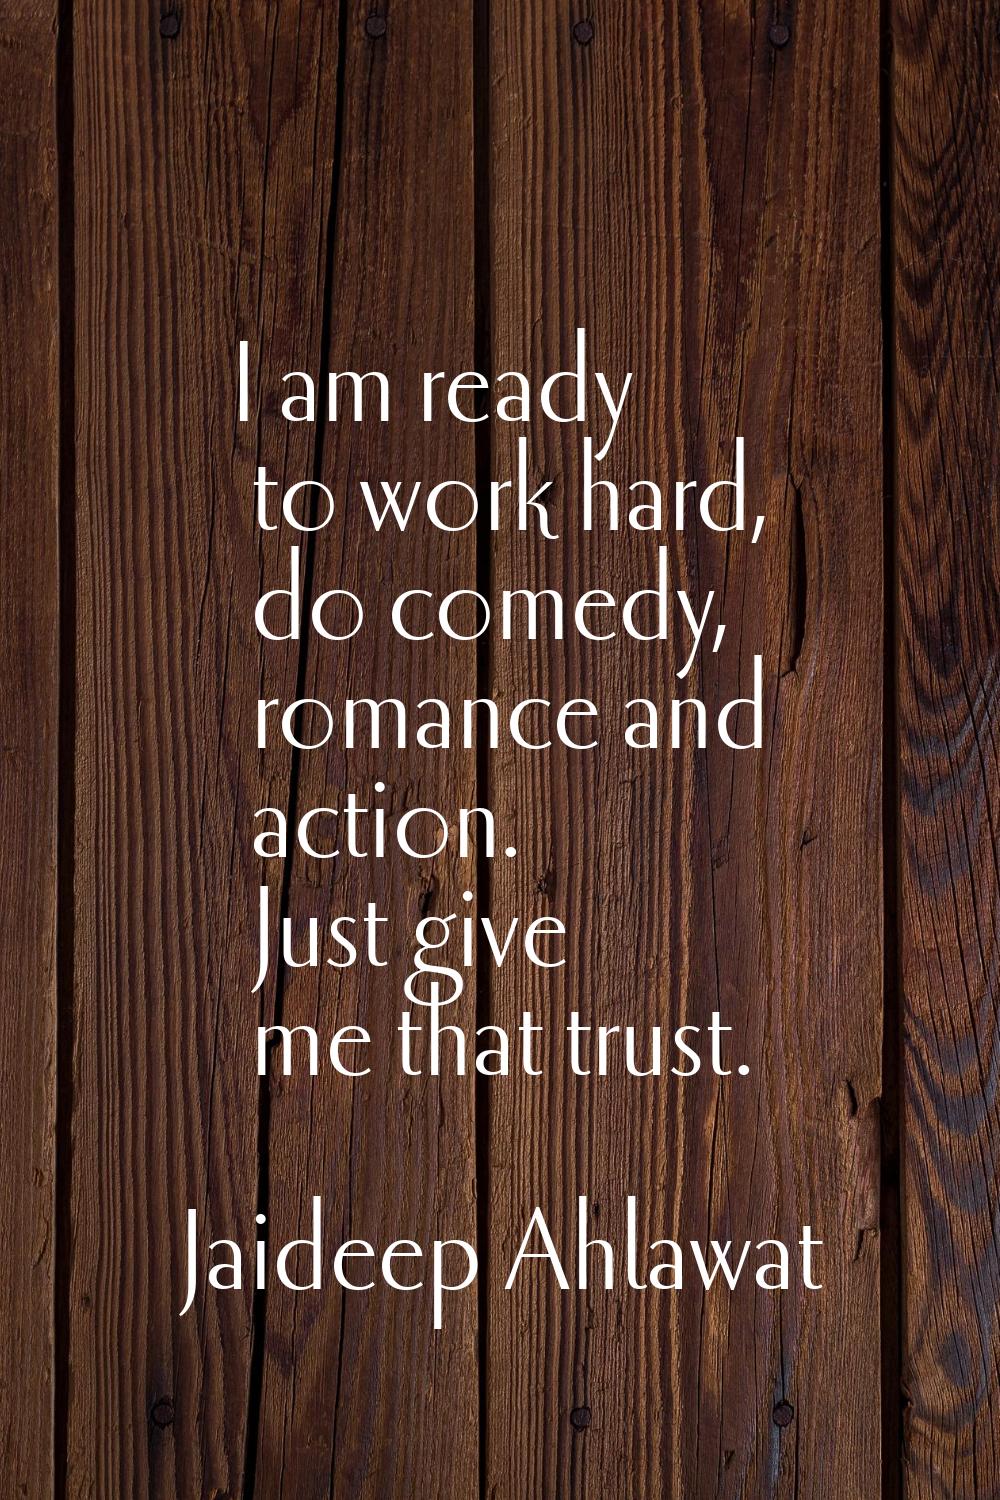 I am ready to work hard, do comedy, romance and action. Just give me that trust.